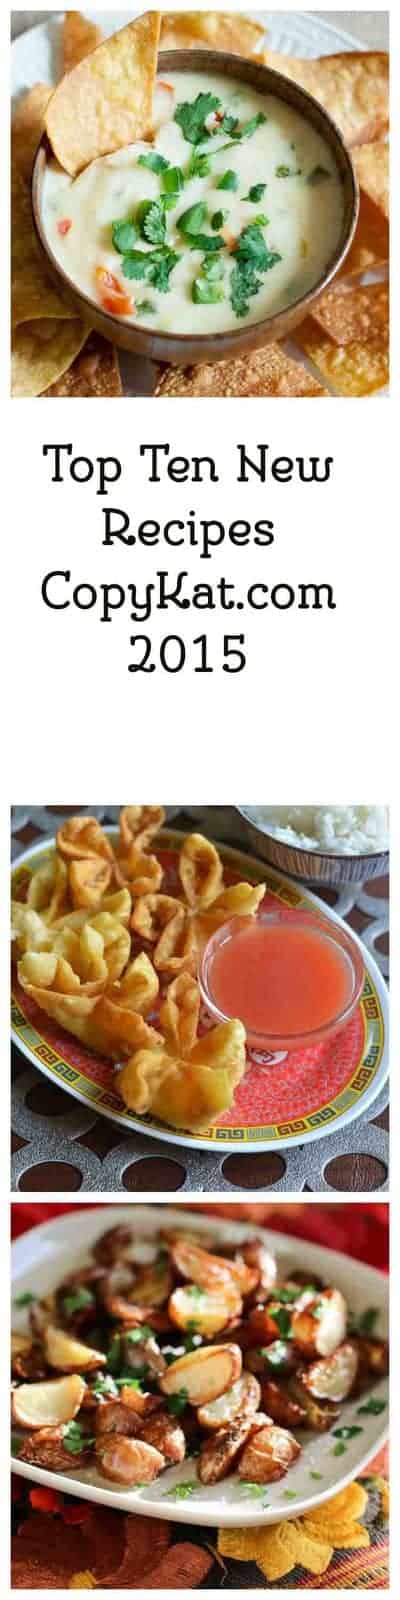 Check out the most popular recipes on CopyKat.com. I bet you find a new favorite recipe here. 